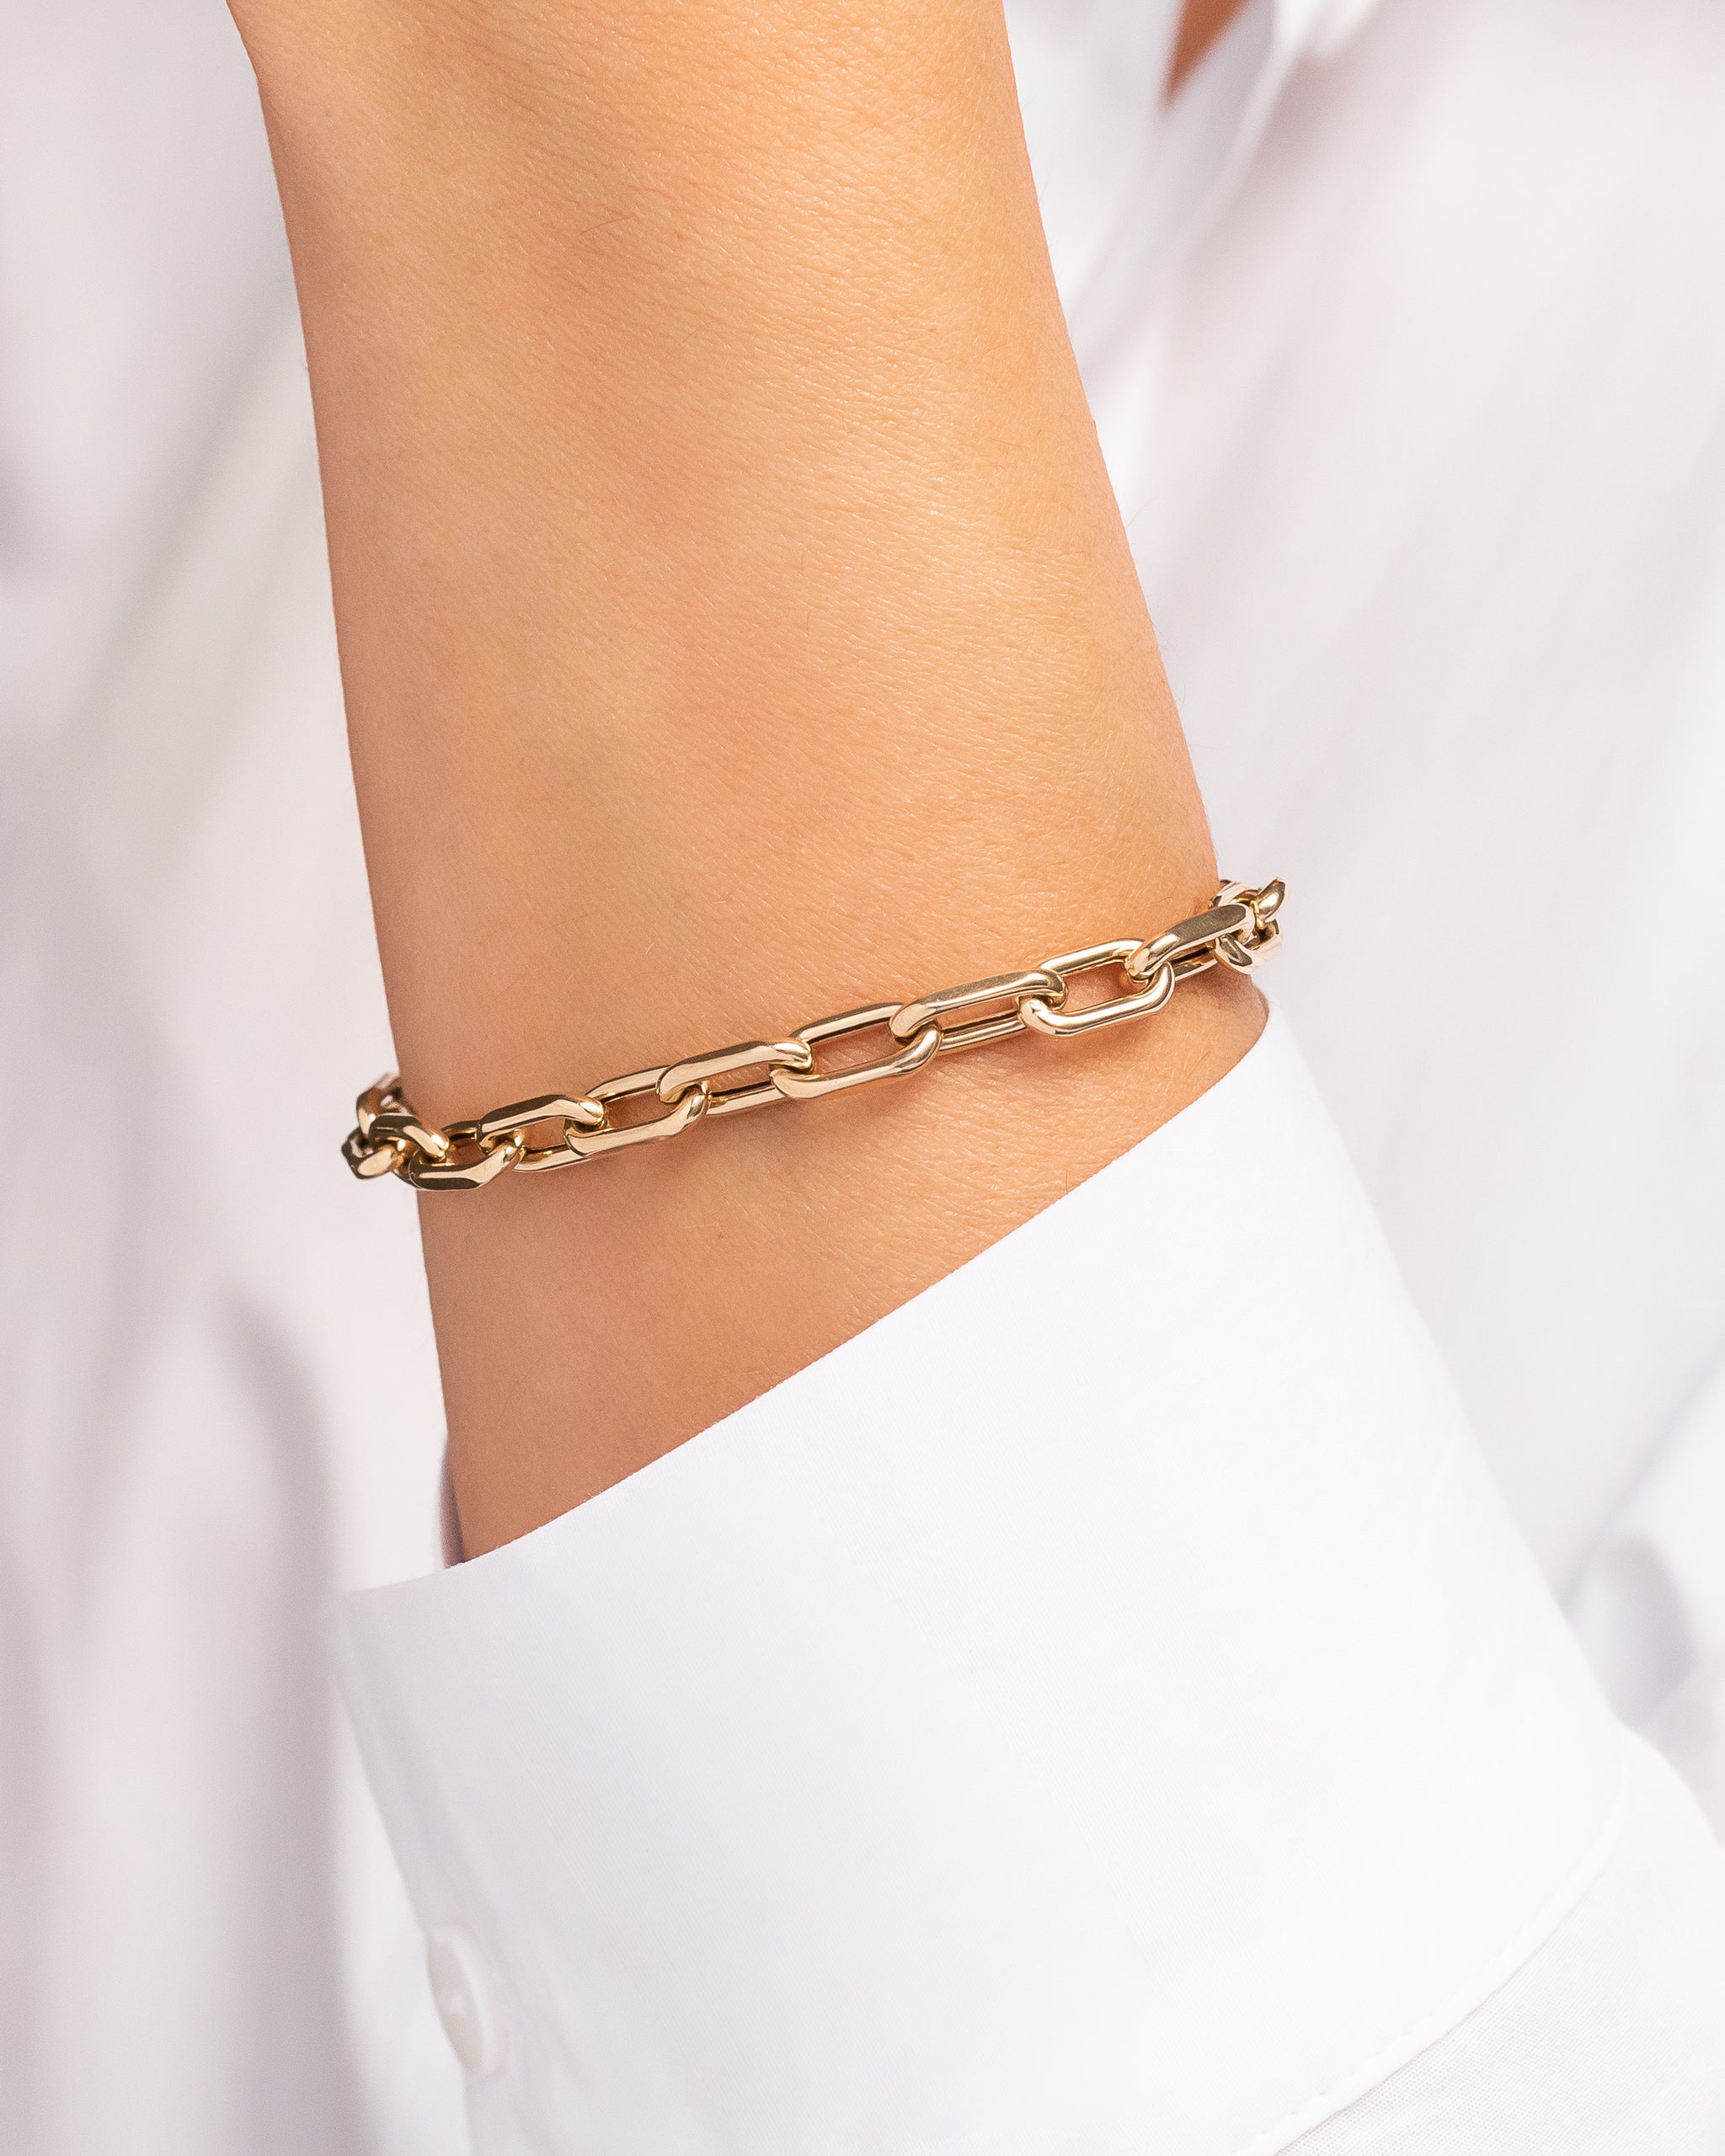 14K Gold Large Open Link Chain Bracelet with Diamond Handcuffs 14K Yellow Gold / 7.5+$80